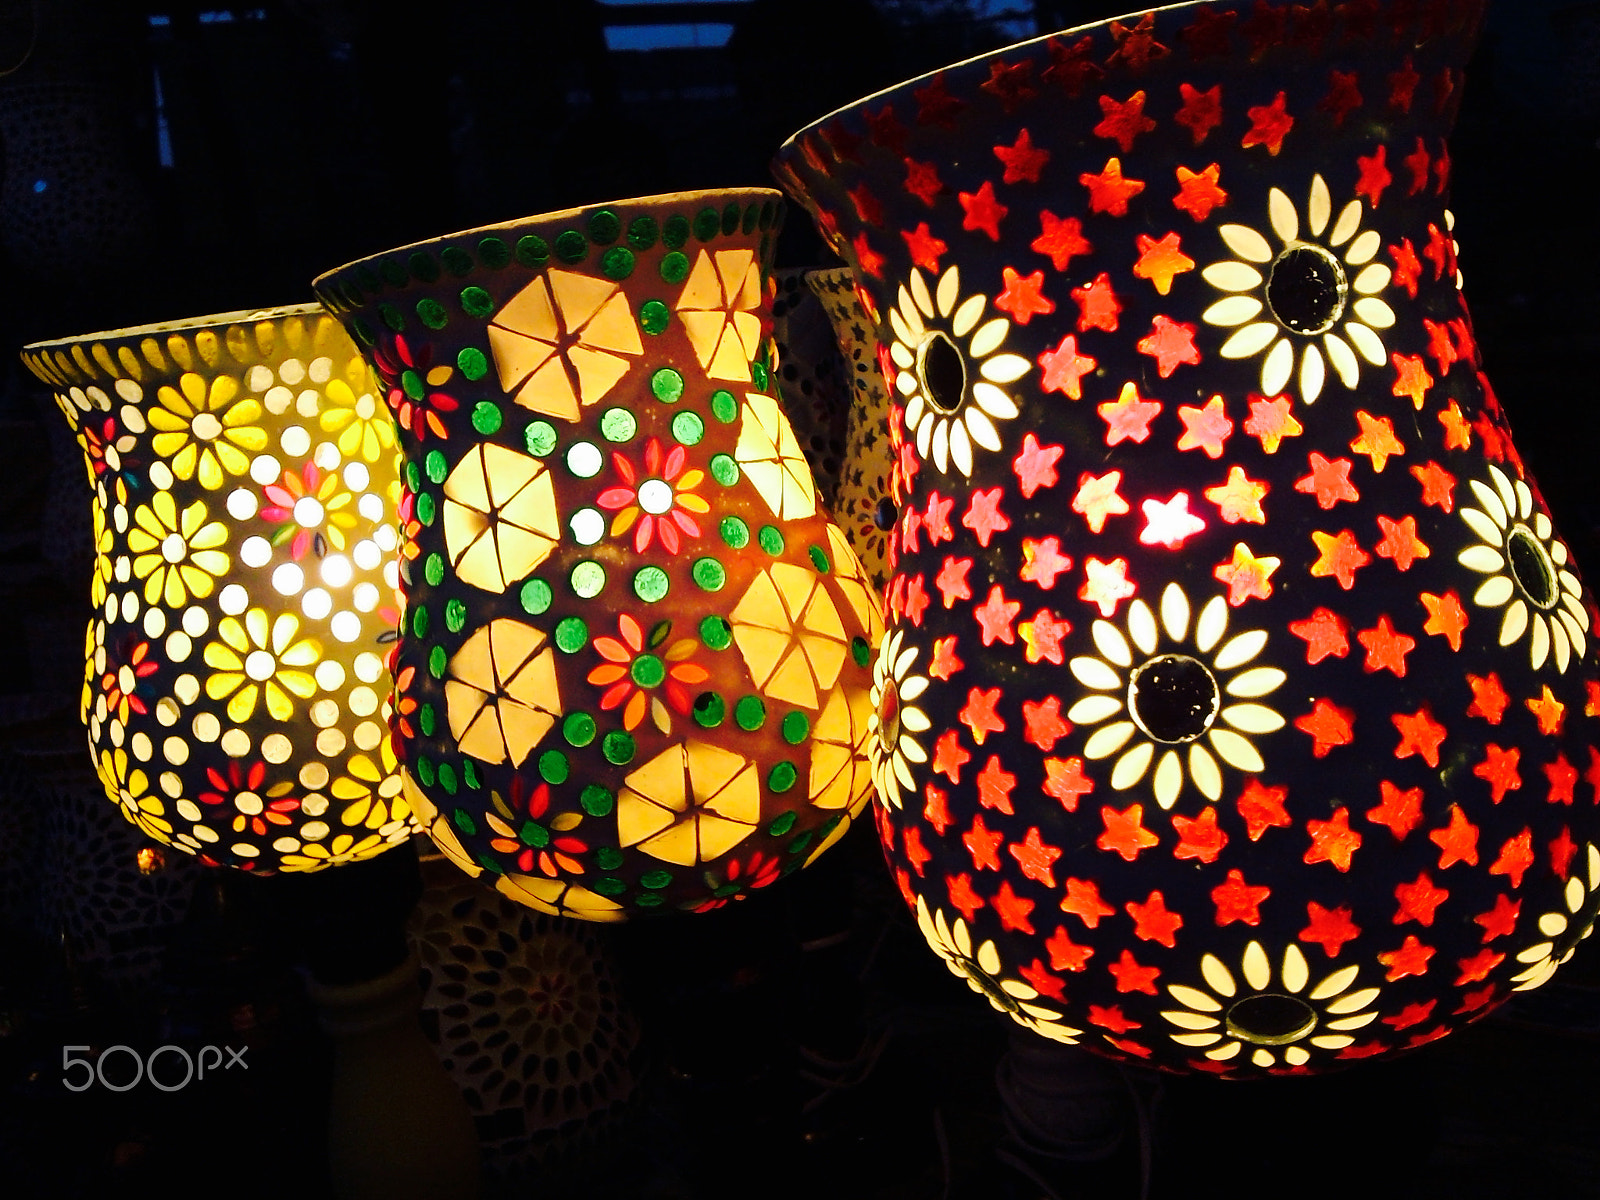 Samsung GT-i7500 sample photo. Colourful handmade lamps photography